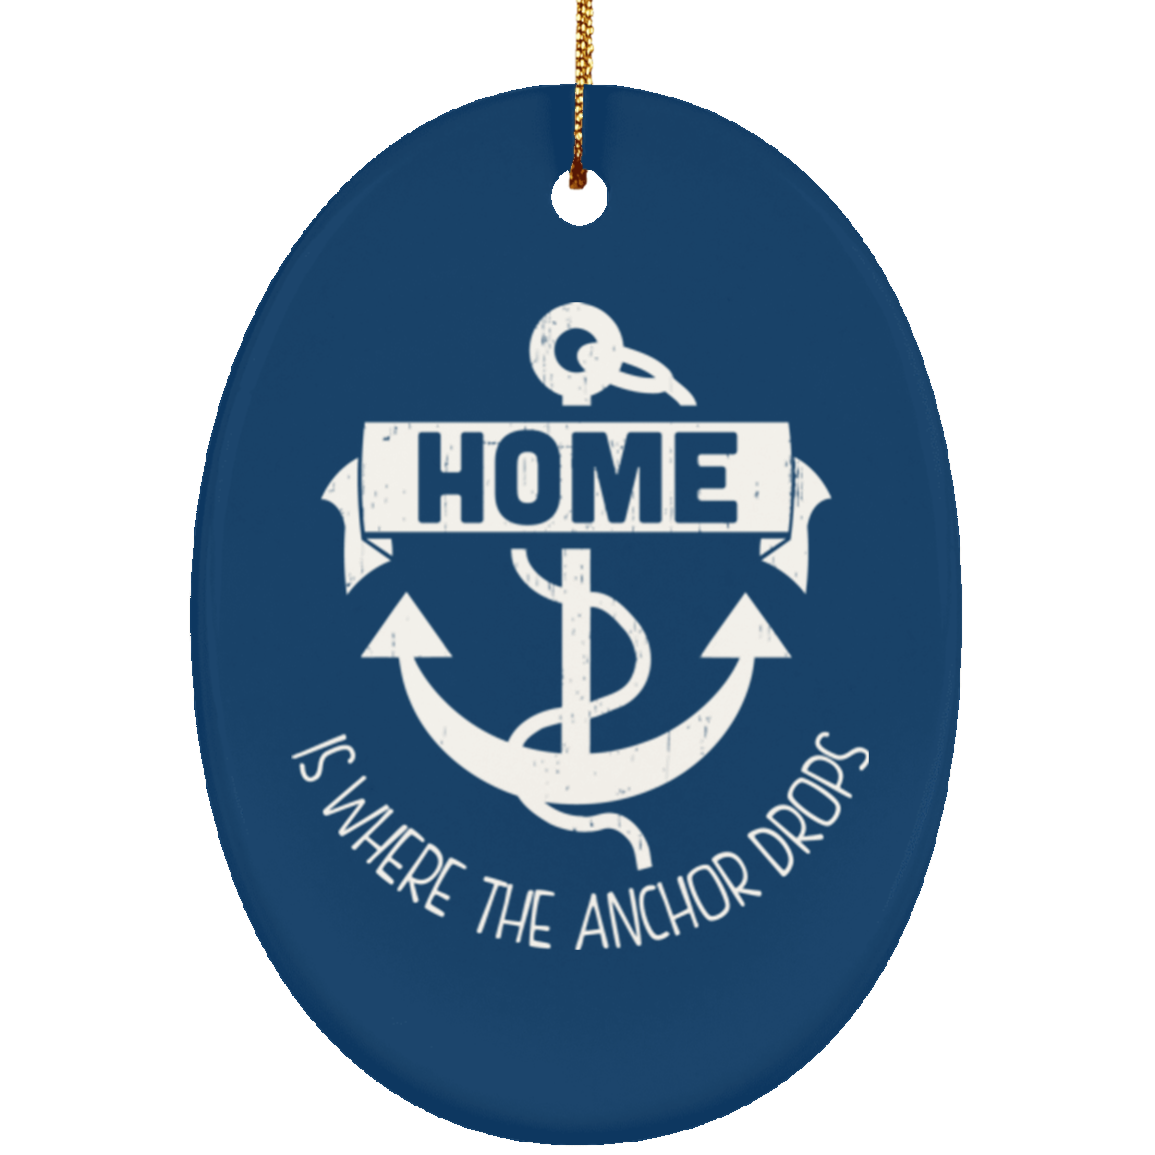 Sailing Gifts Christmas Tree Decor Ornament - GoneBold.gift